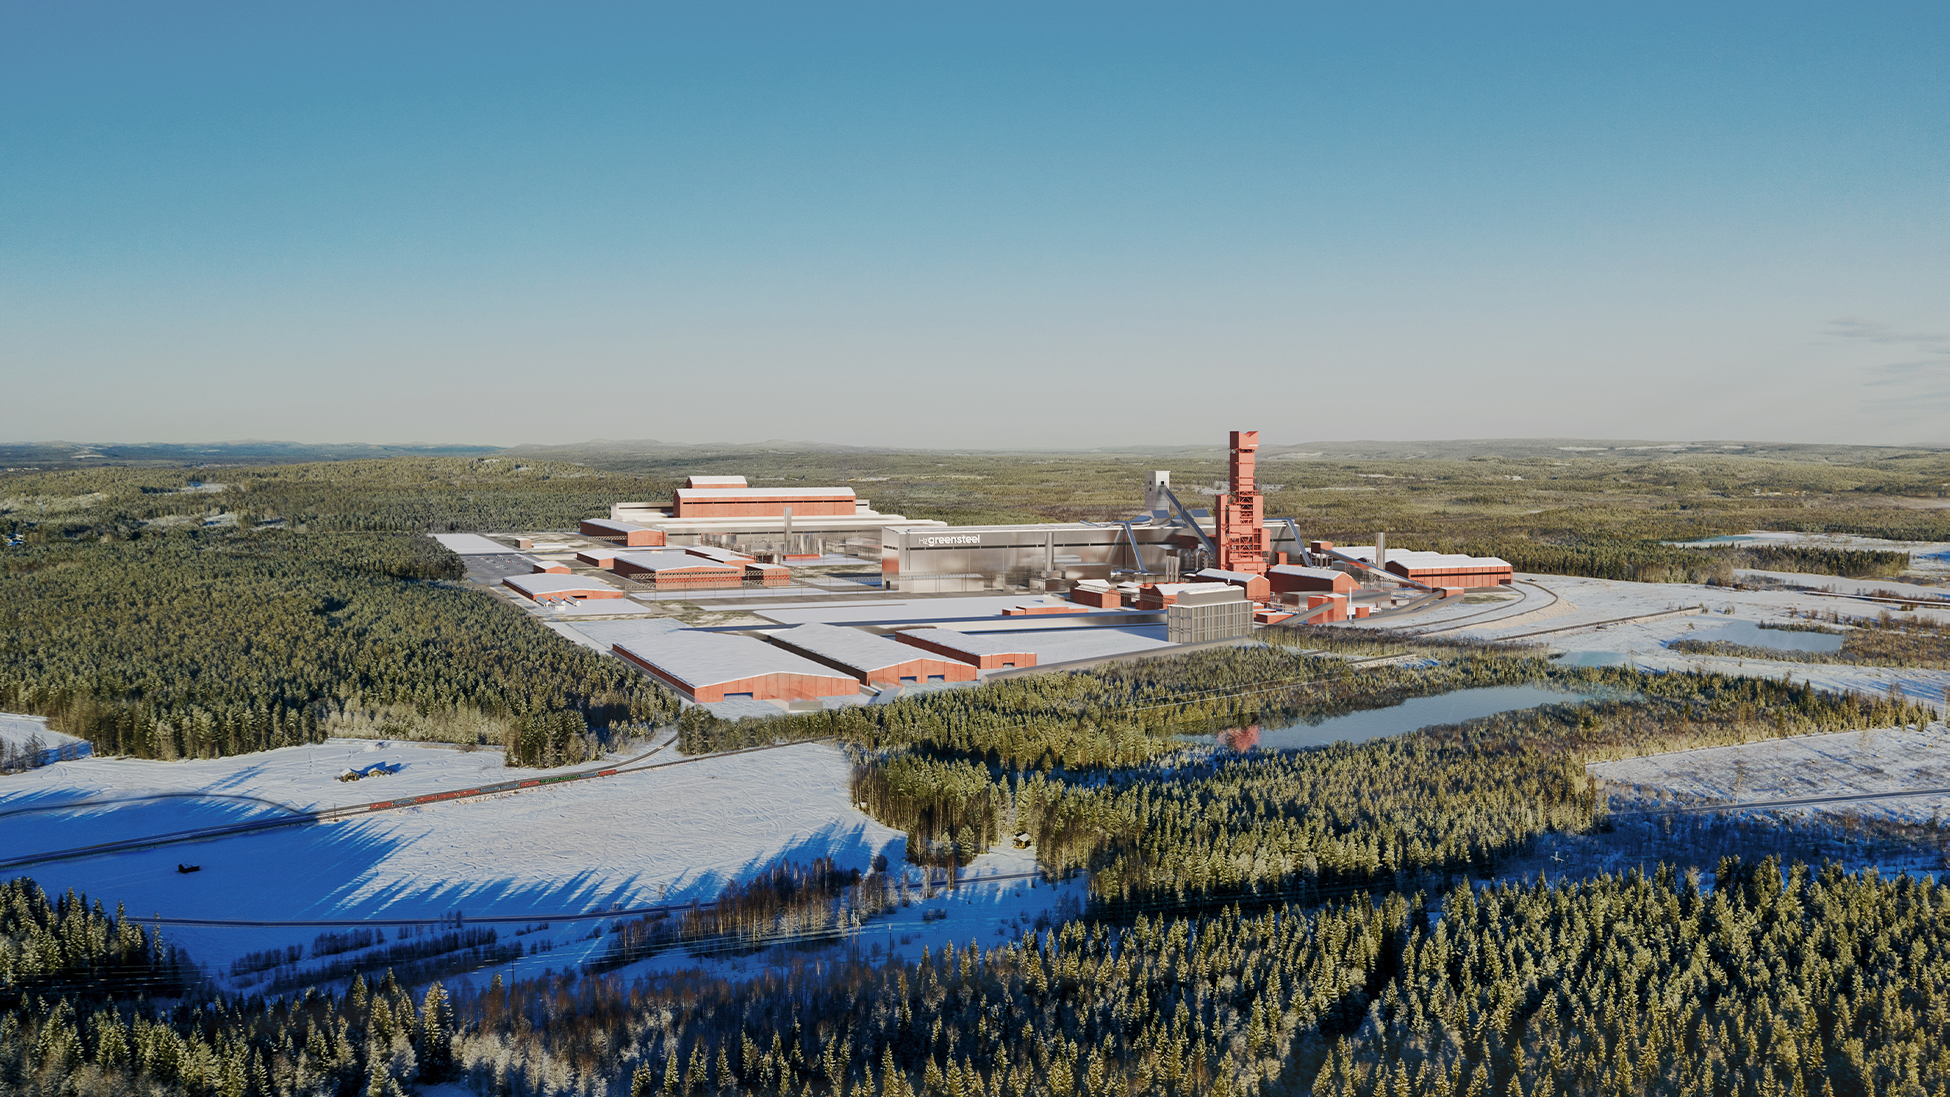 🇸🇪 H2 Green Steel raises more than €4 billion in debt financing for the world’s first large-scale green steel plant